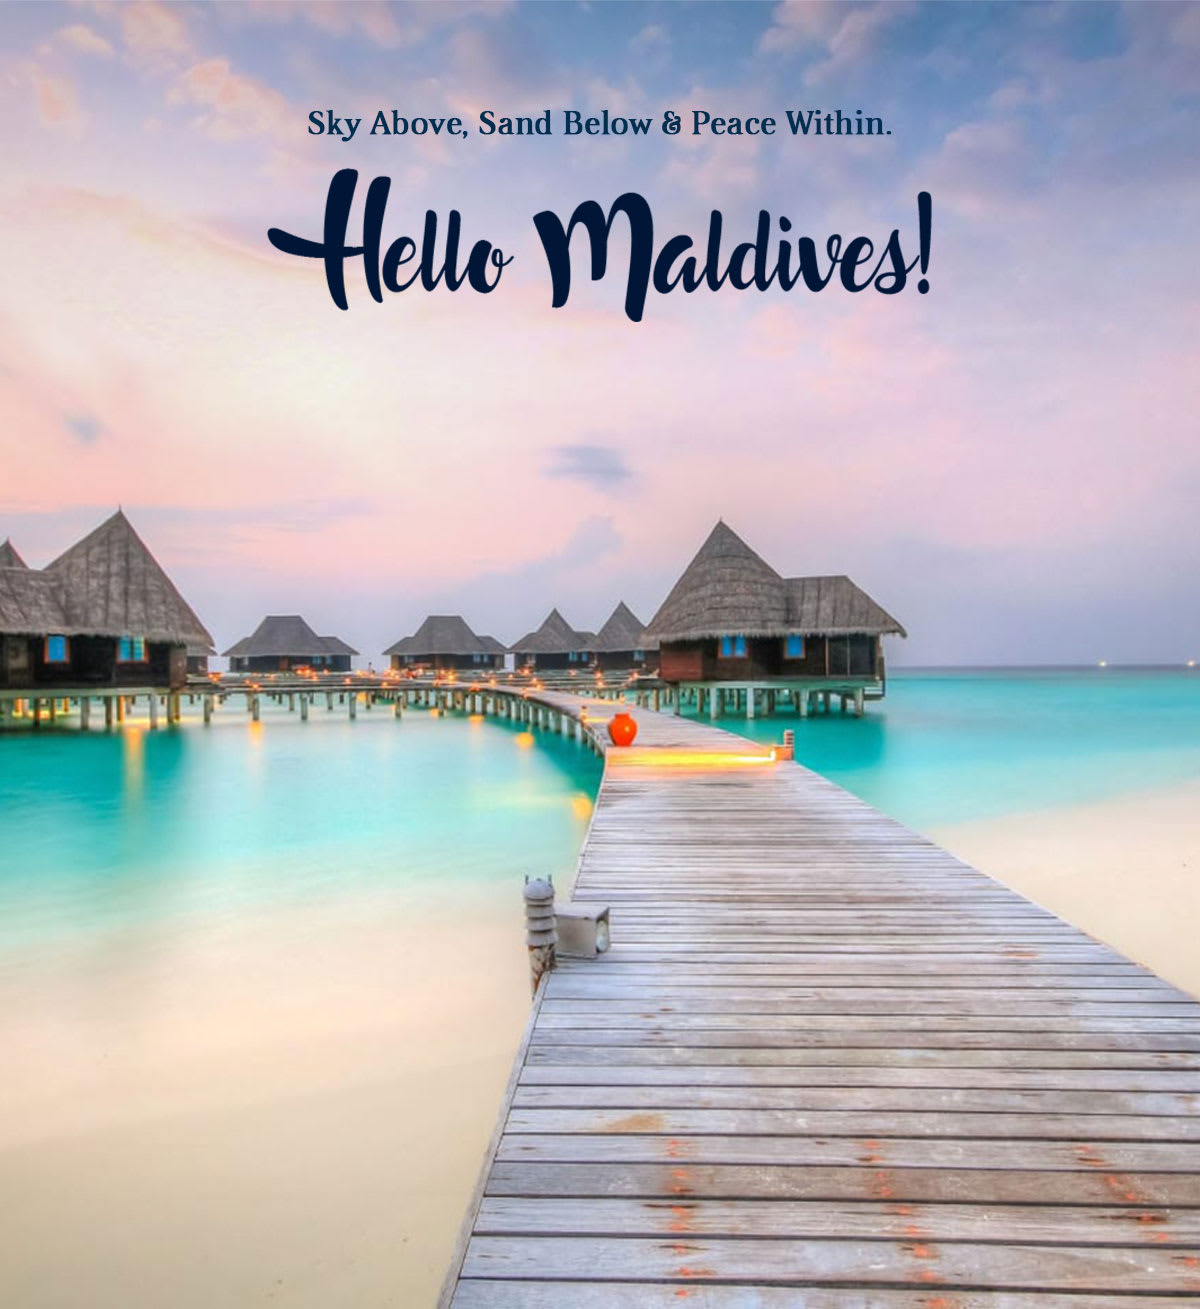 Trip to the Maldives - Experience Paradise on Earth